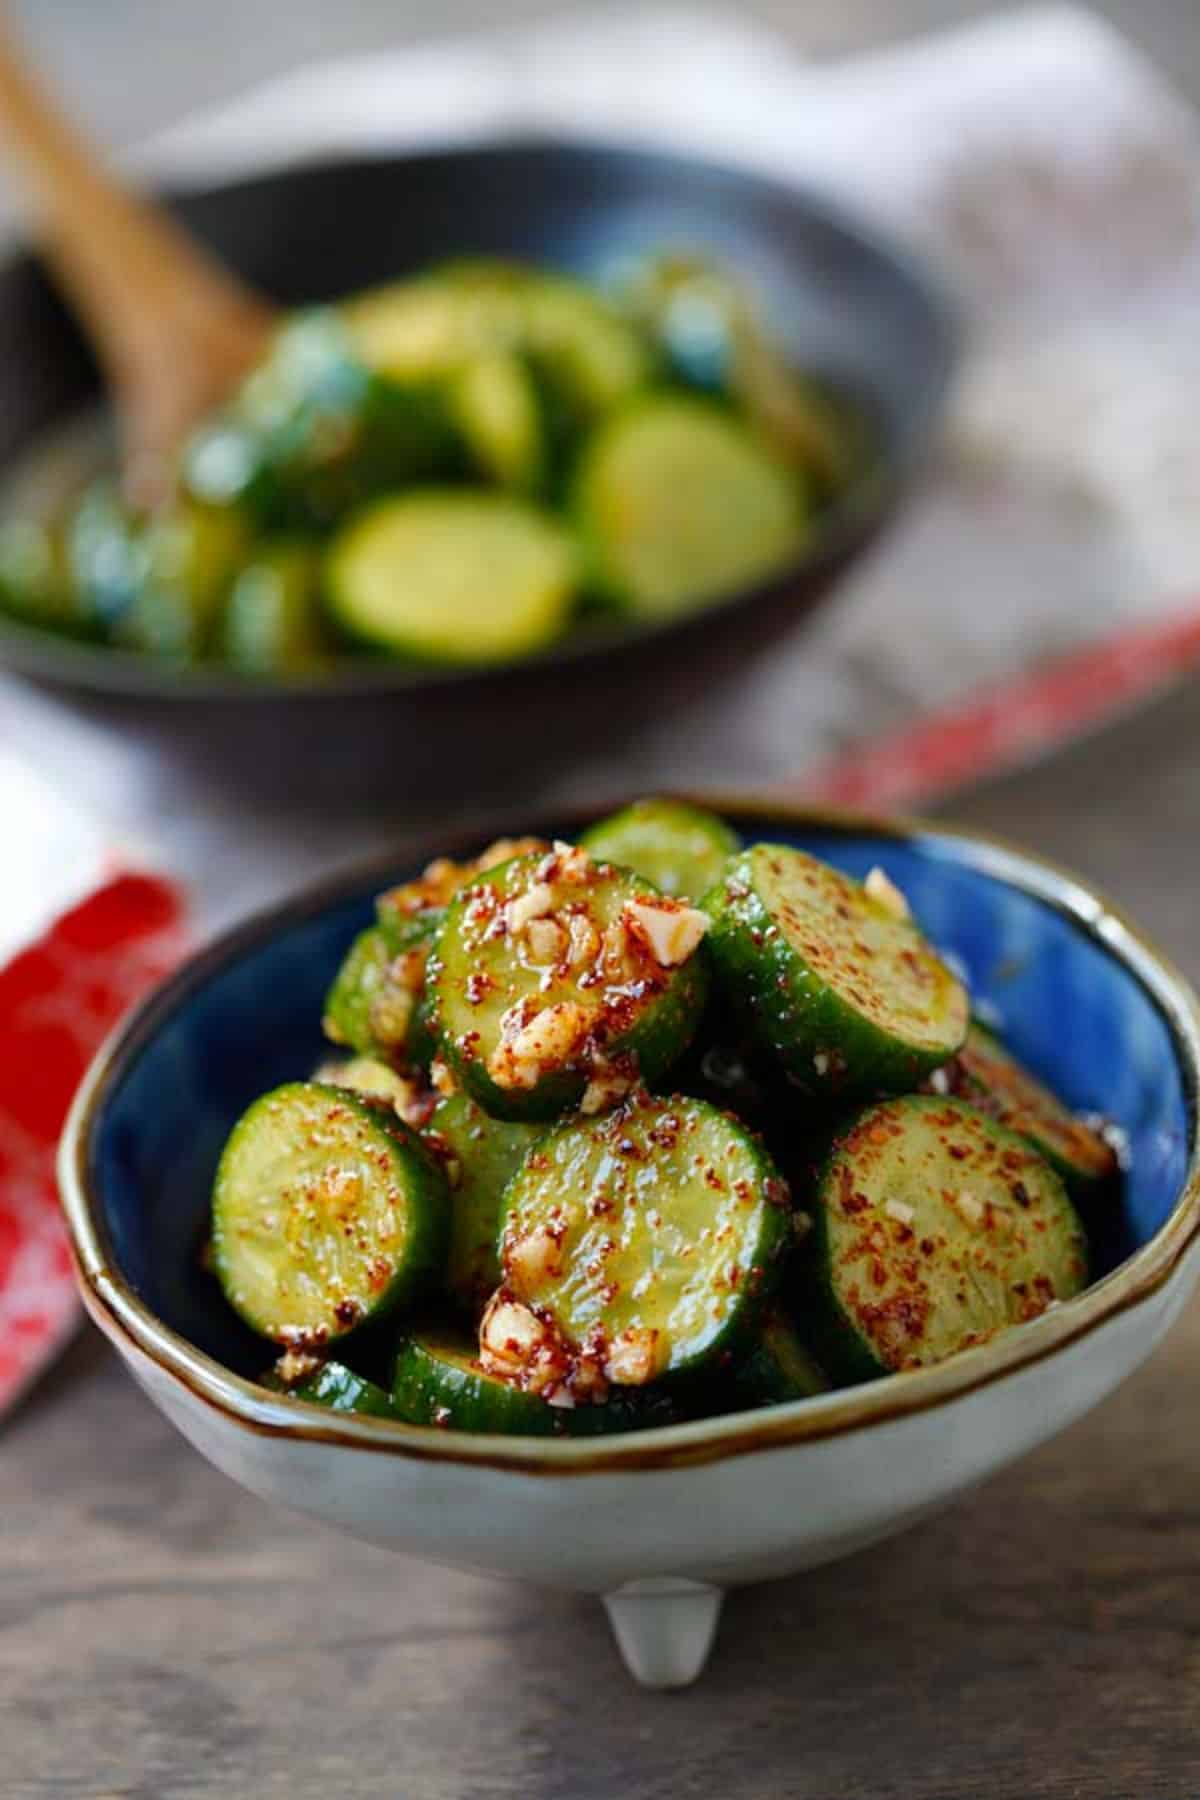 Asian cucumber salad in a small blue bowl.